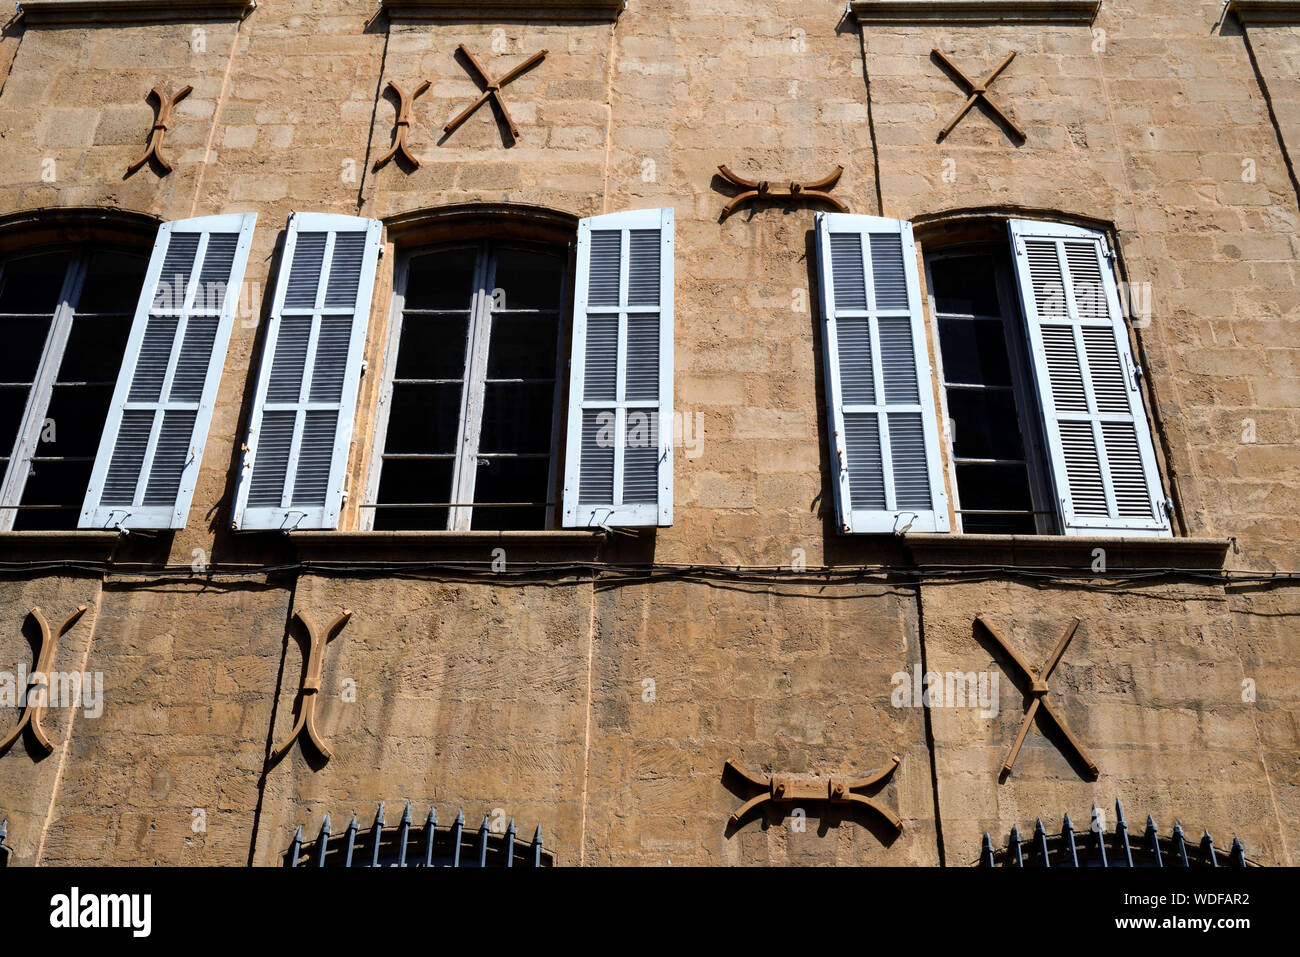 Old Windows, Shutters & Facade with Reinforcing Metal Bars or Rebars in the Mazarin District or Quartier Mazarin Aix-en-Provence Provence France Stock Photo